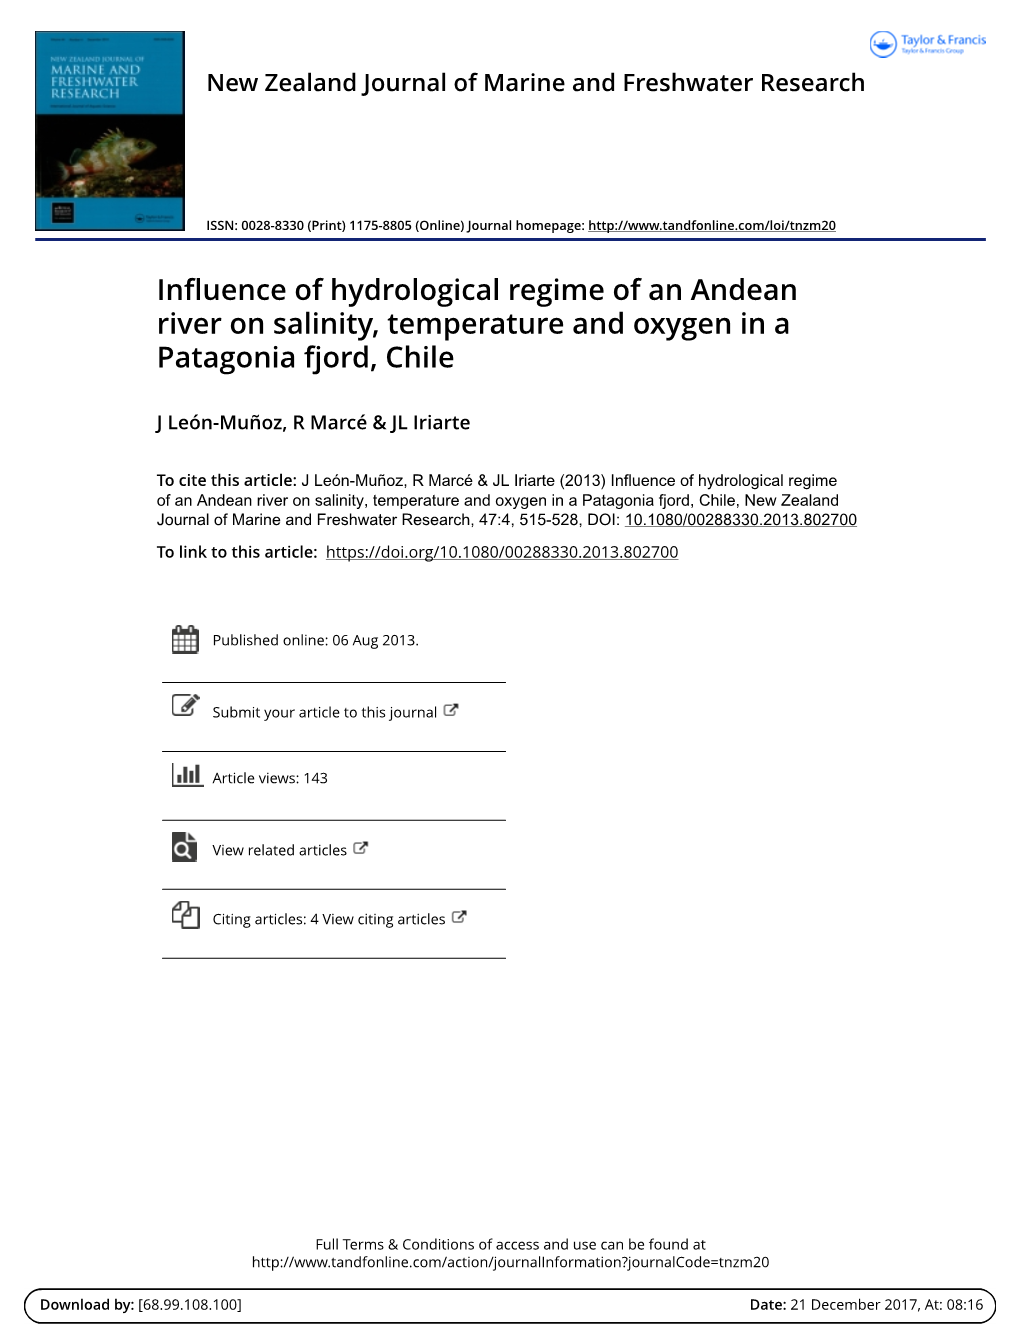 Influence of Hydrological Regime of an Andean River on Salinity, Temperature and Oxygen in a Patagonia Fjord, Chile